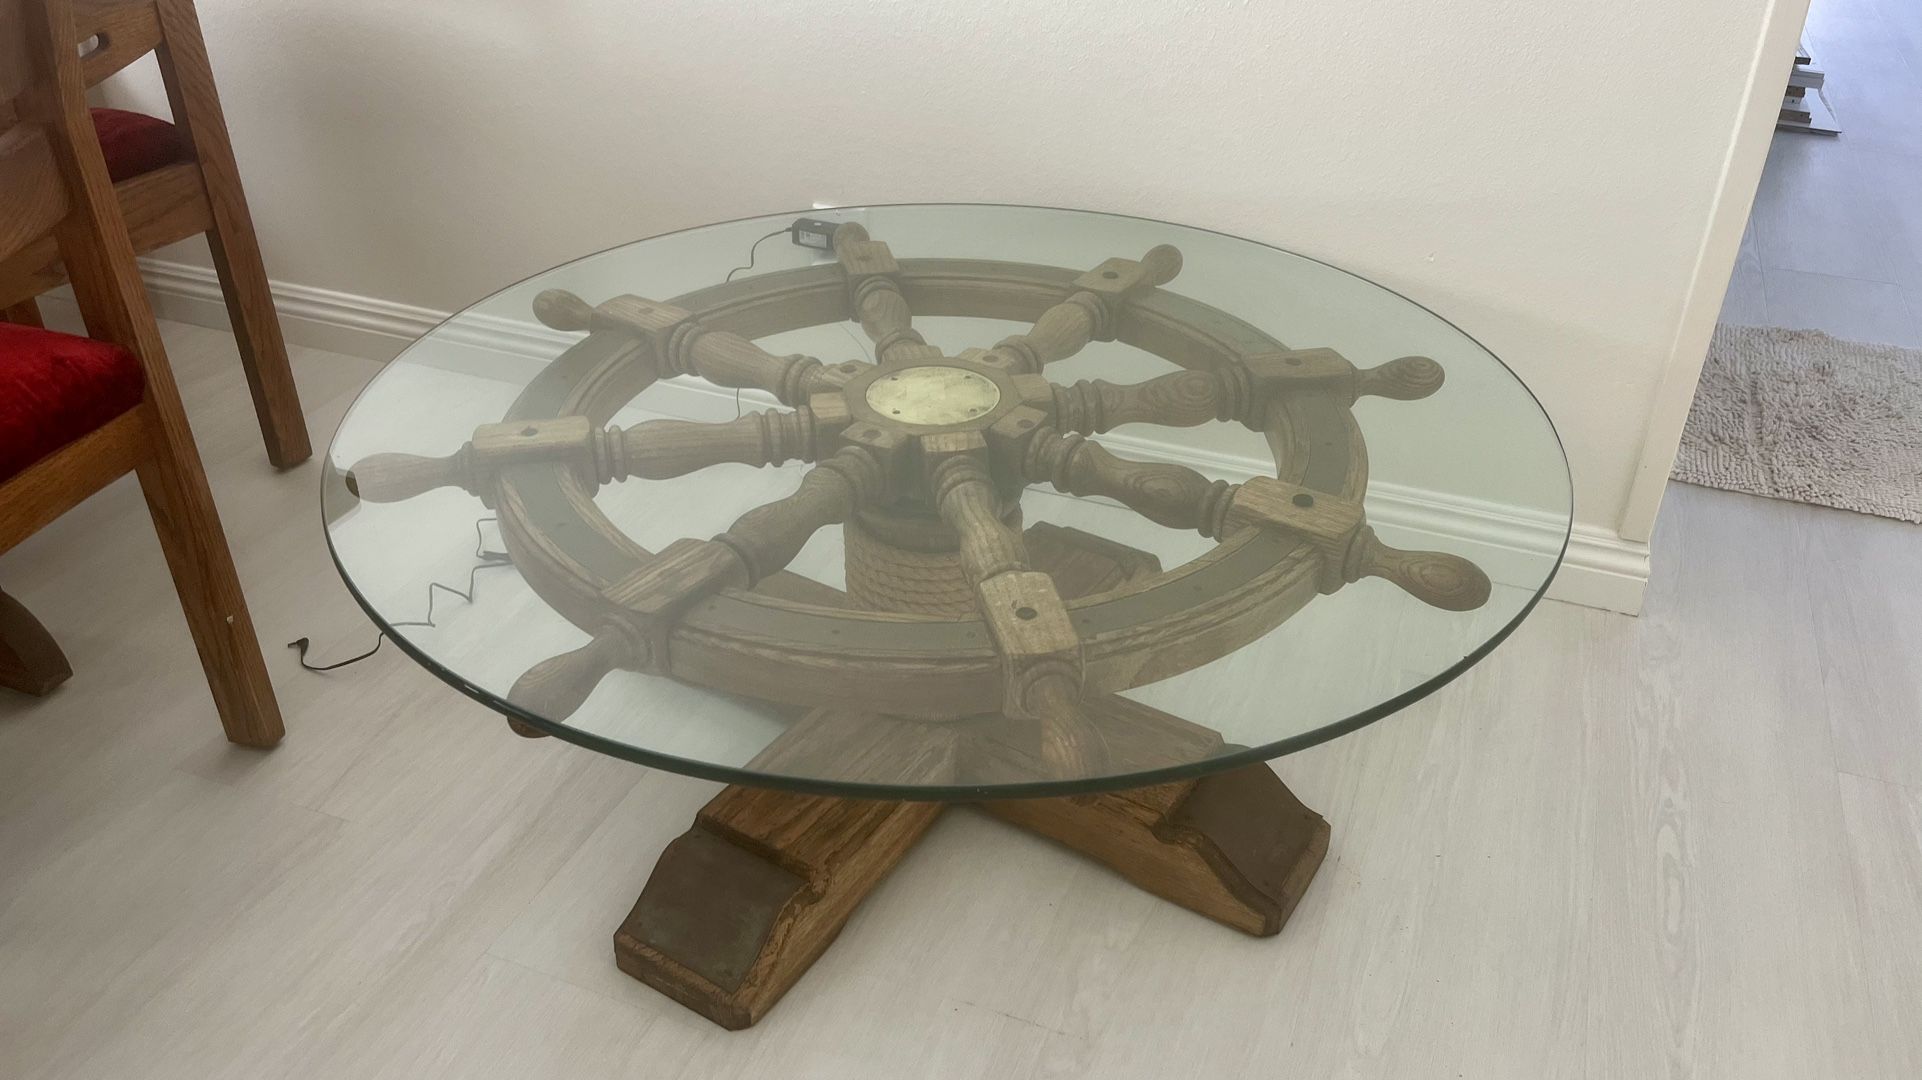 Rounds Glass/wood Table